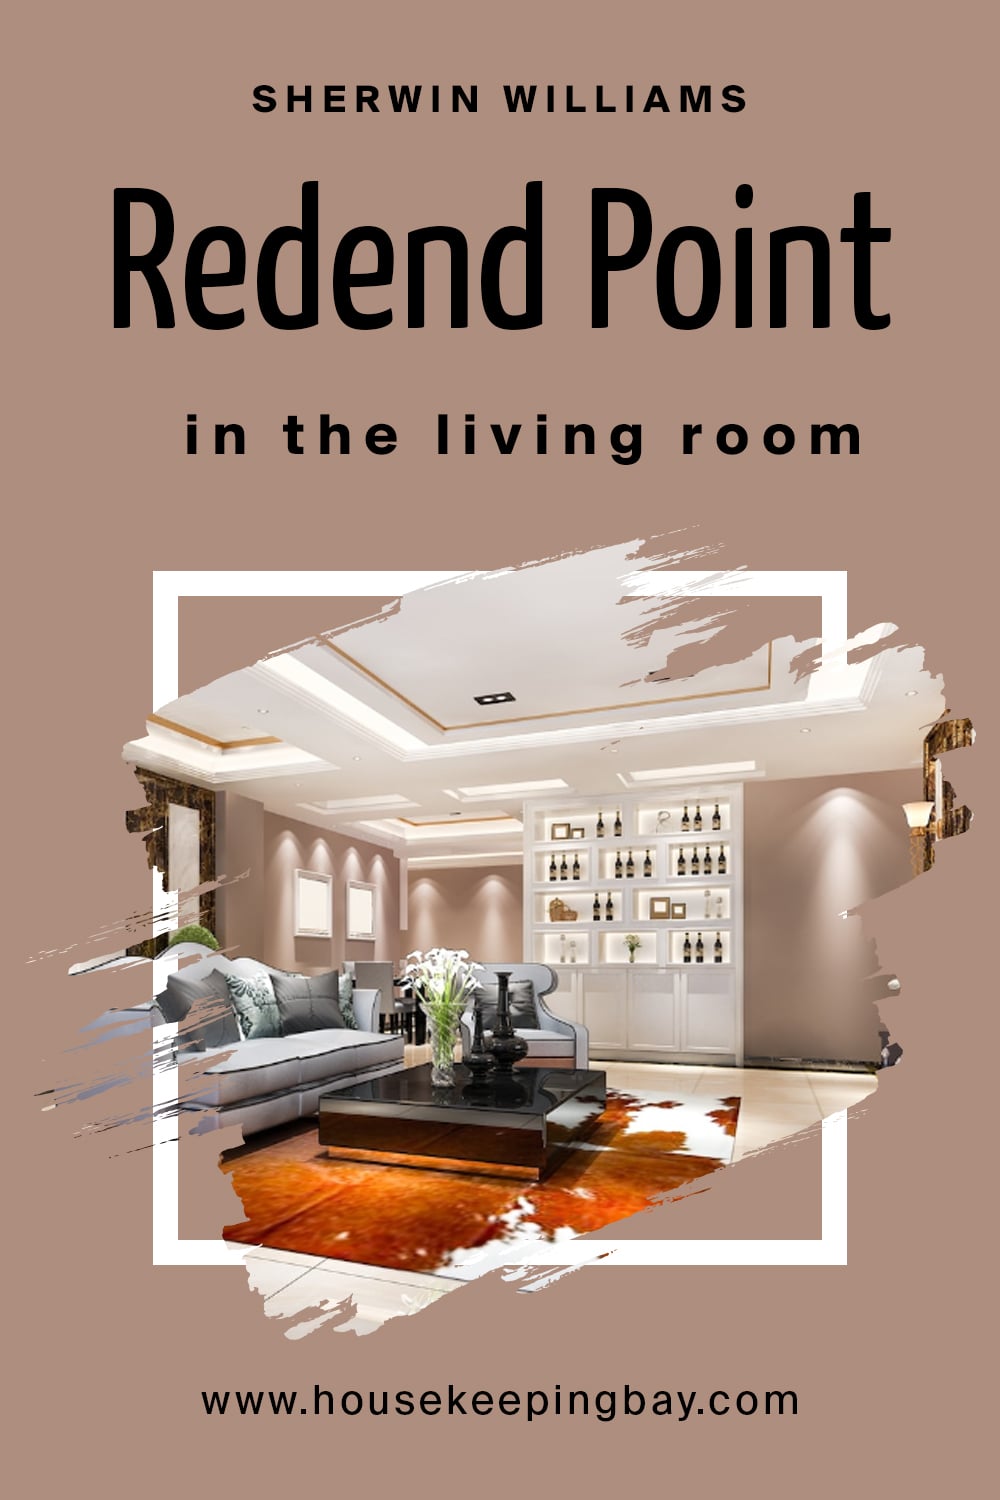 Sherwin Williams. Redend Point In the Living Room